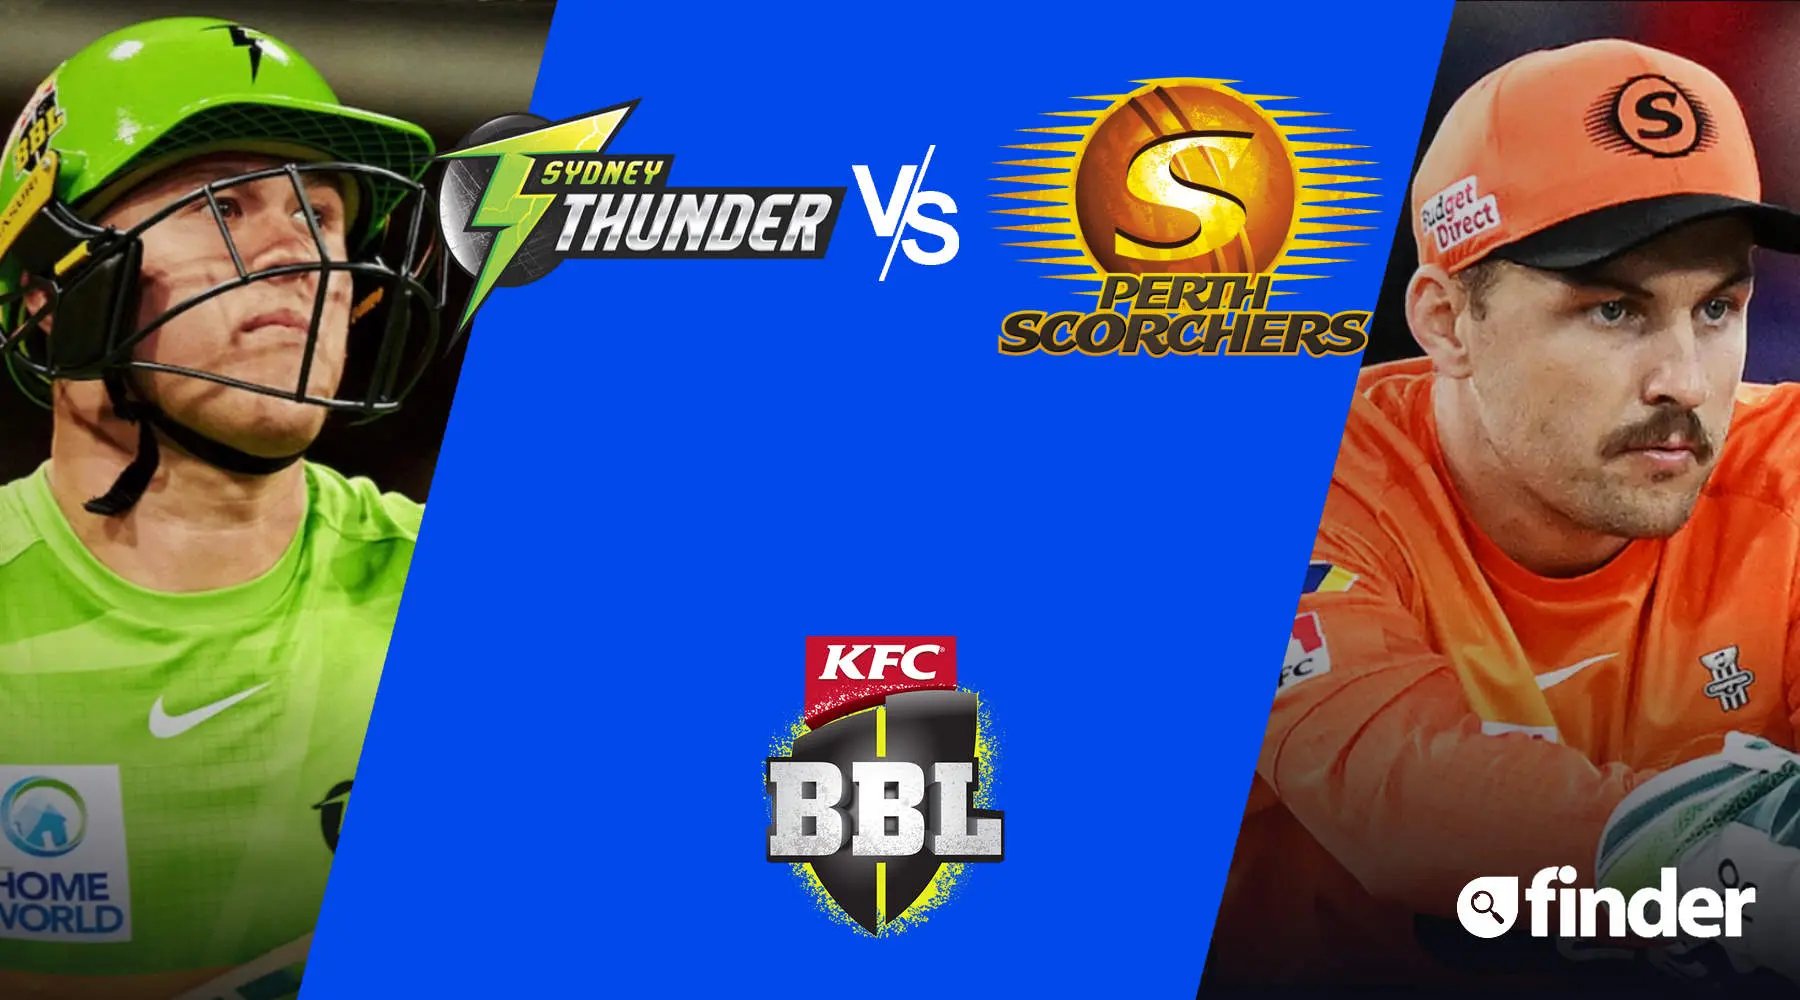 Sydney Thunder vs Perth Scorchers How to watch BBL live